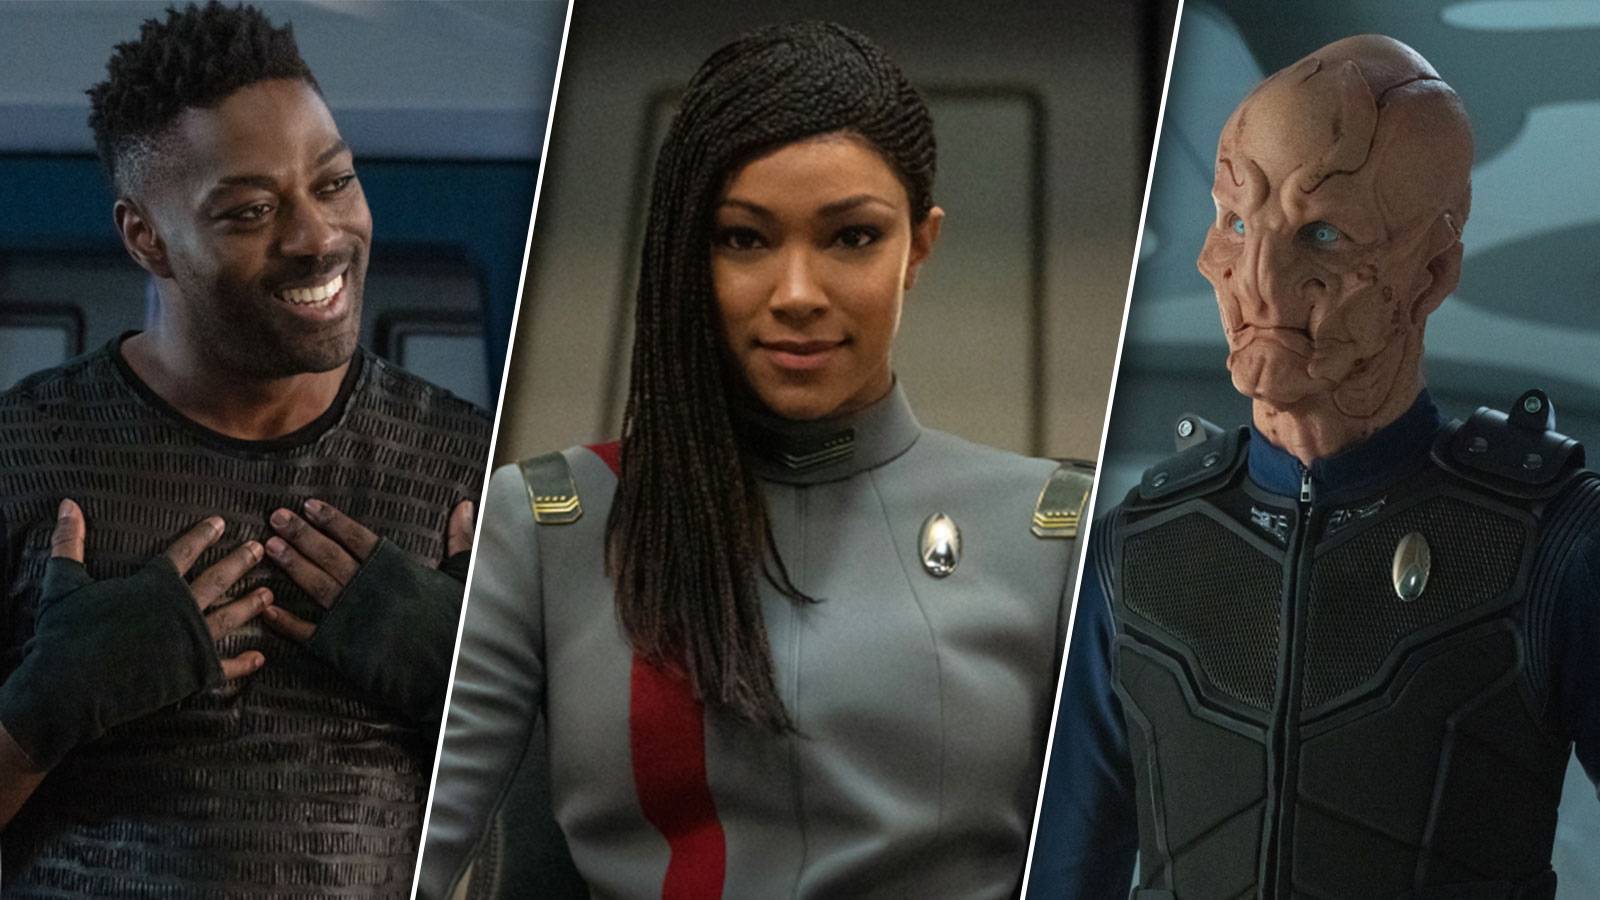 Star Trek: Discovery Season 3 Blu-Ray Review: An Exceptional Release That Could’ve Been Even Better